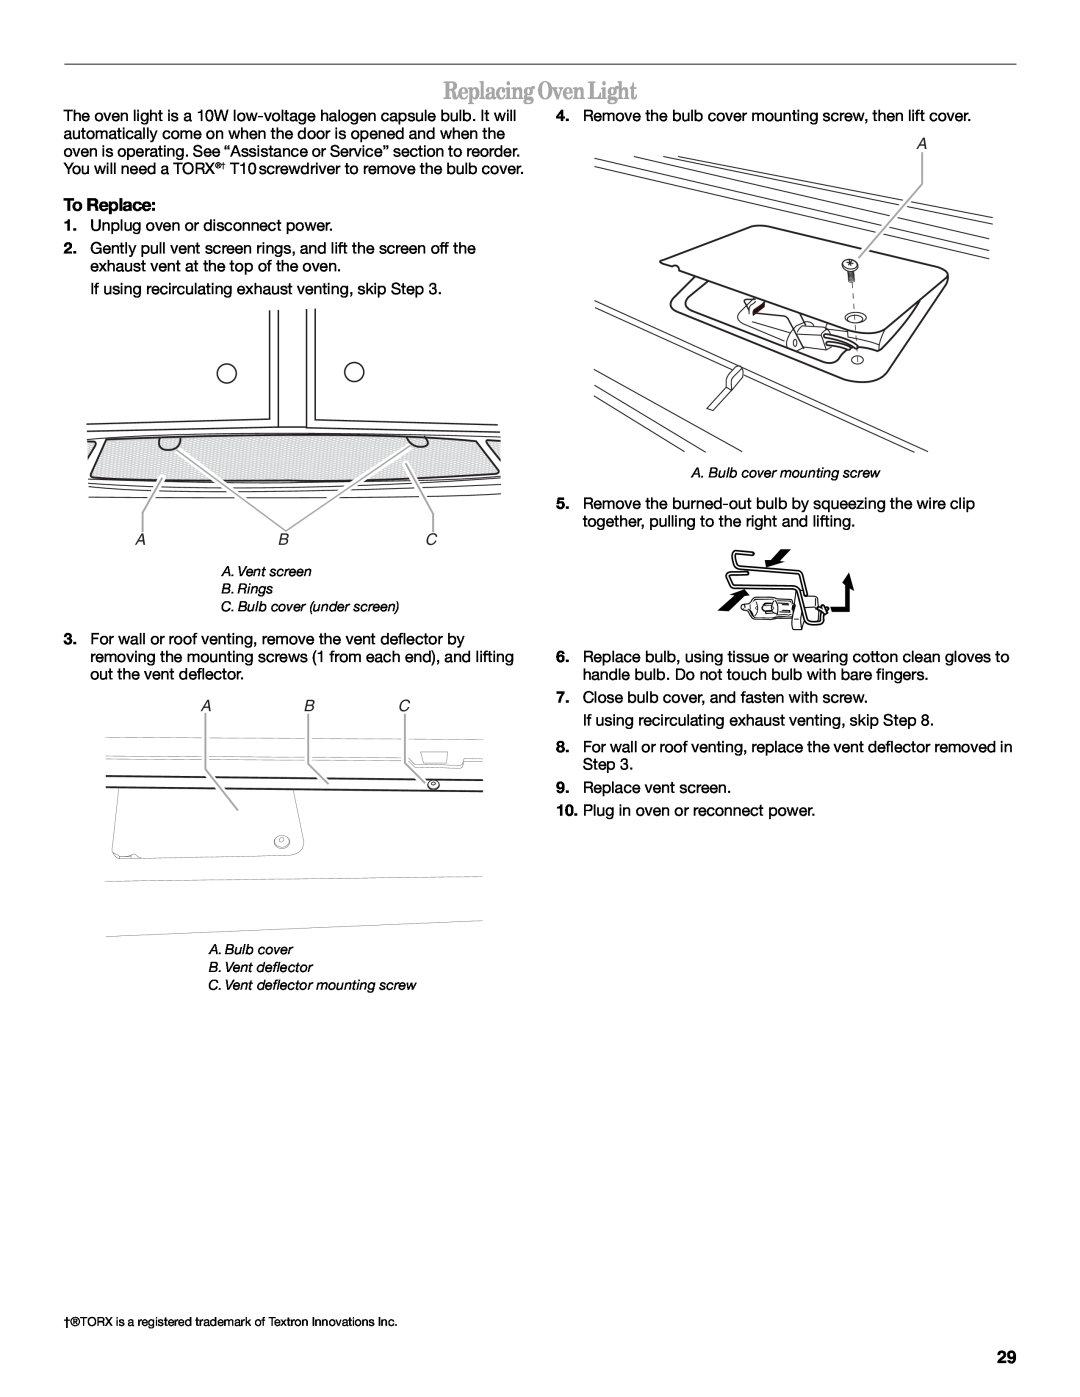 Whirlpool GH6208XR manual Replacing OvenLight, To Replace, A. Bulb cover mounting screw 